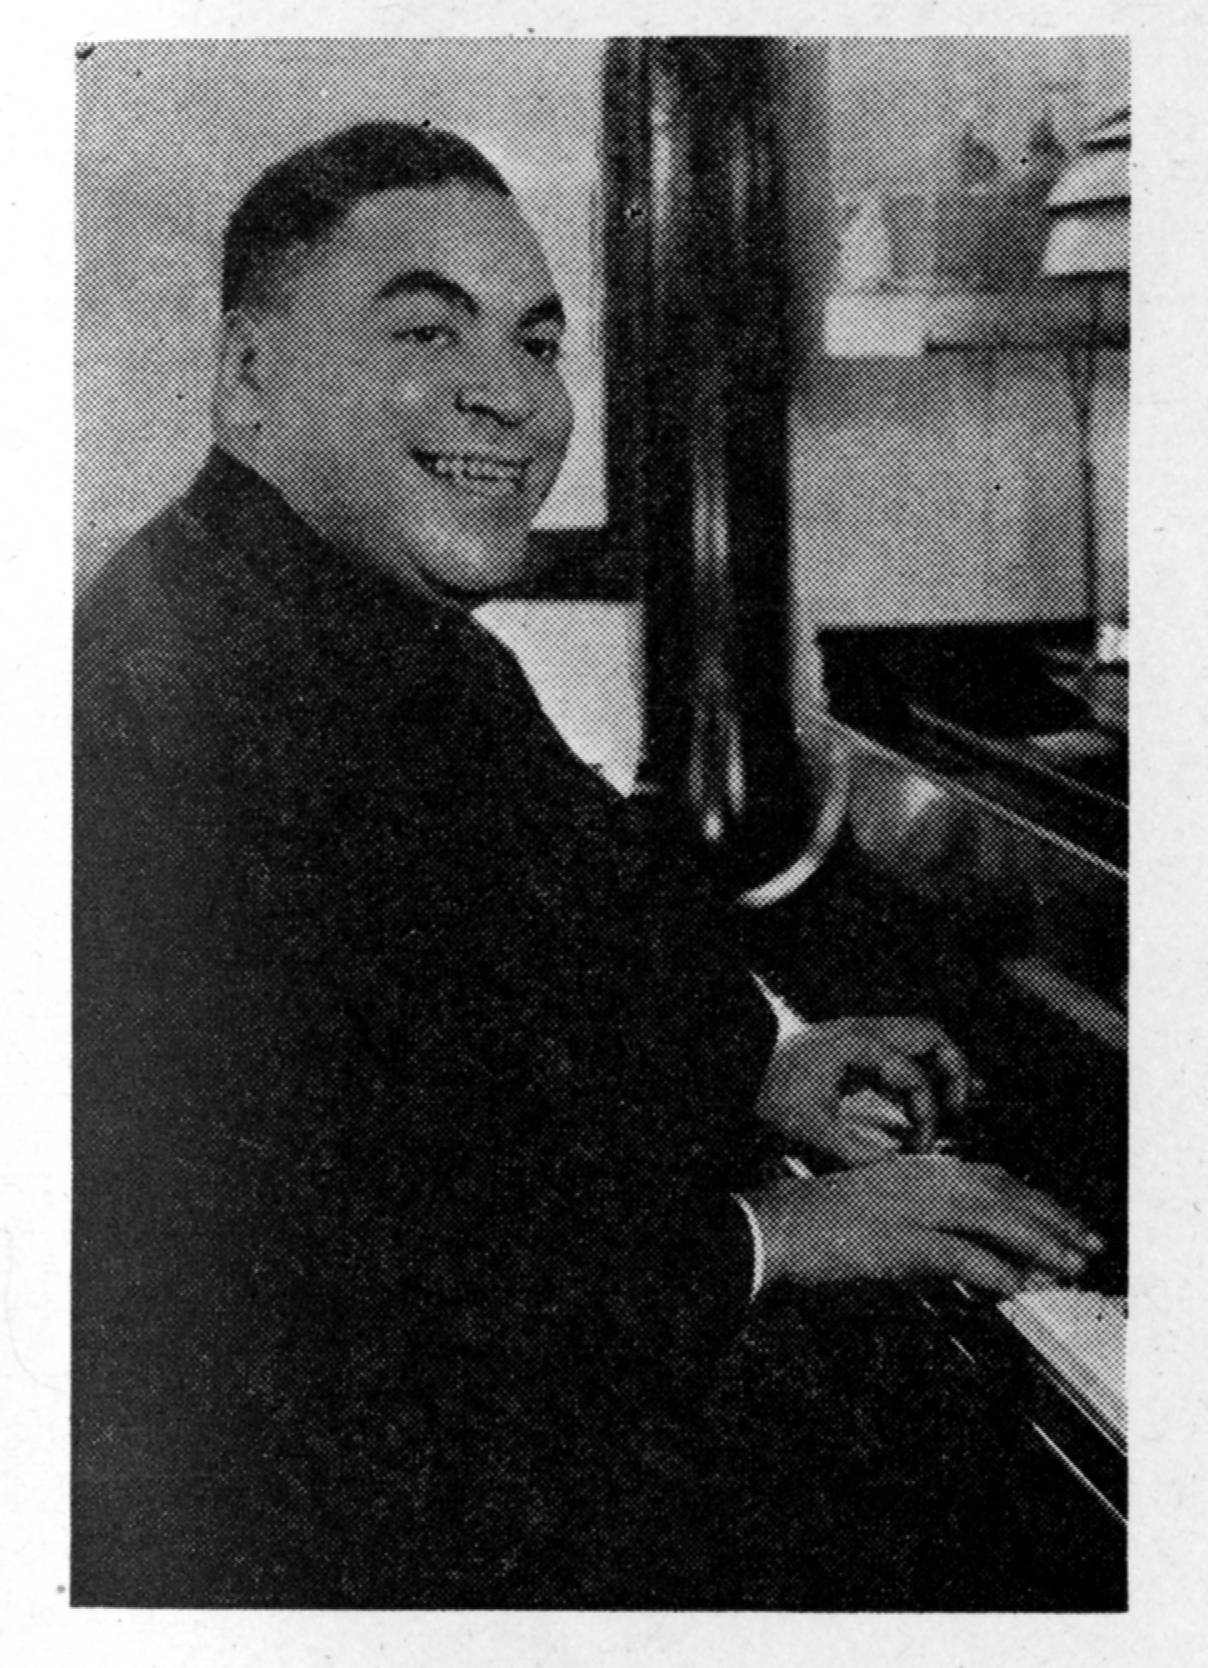 American Pianist Fats Waller Piano Performance Black And White Portrait Wallpaper